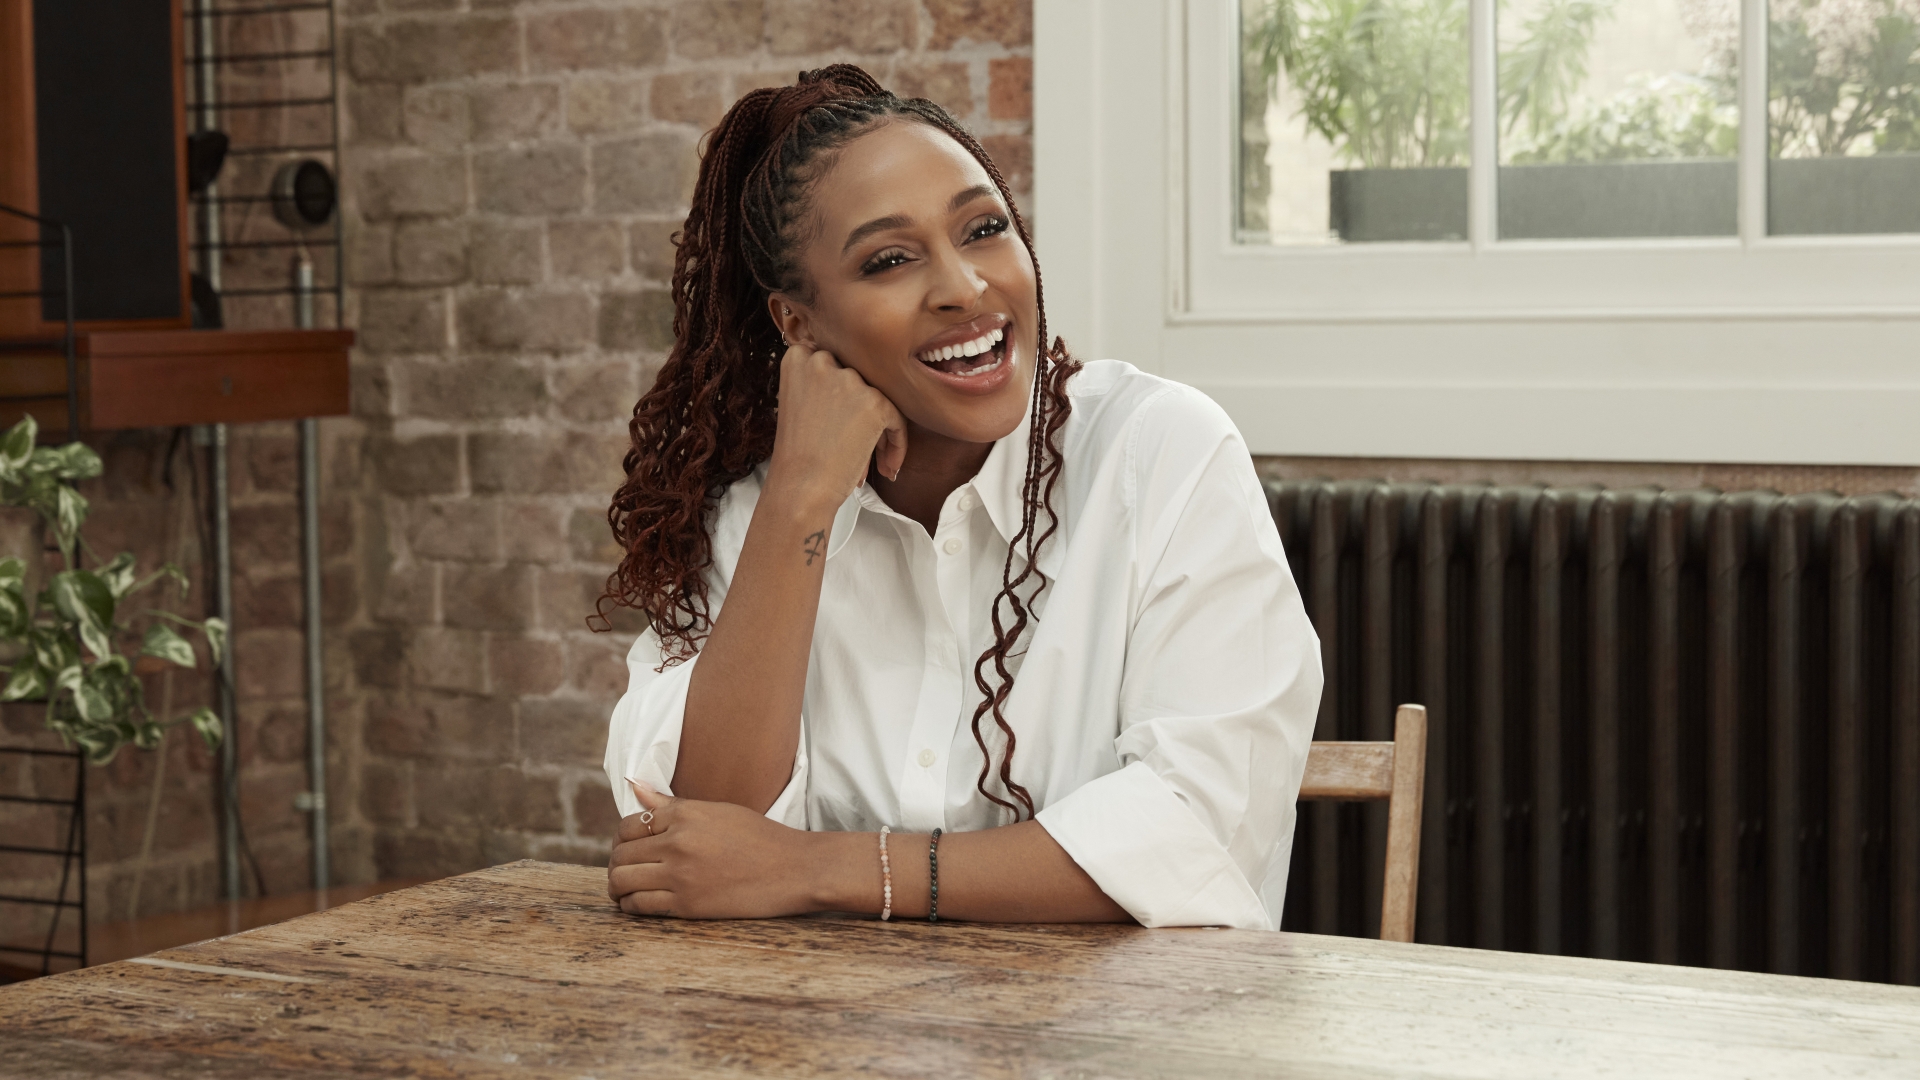 Alexandra Burke reveals her stomach issues - as IBS forces Brits to miss work